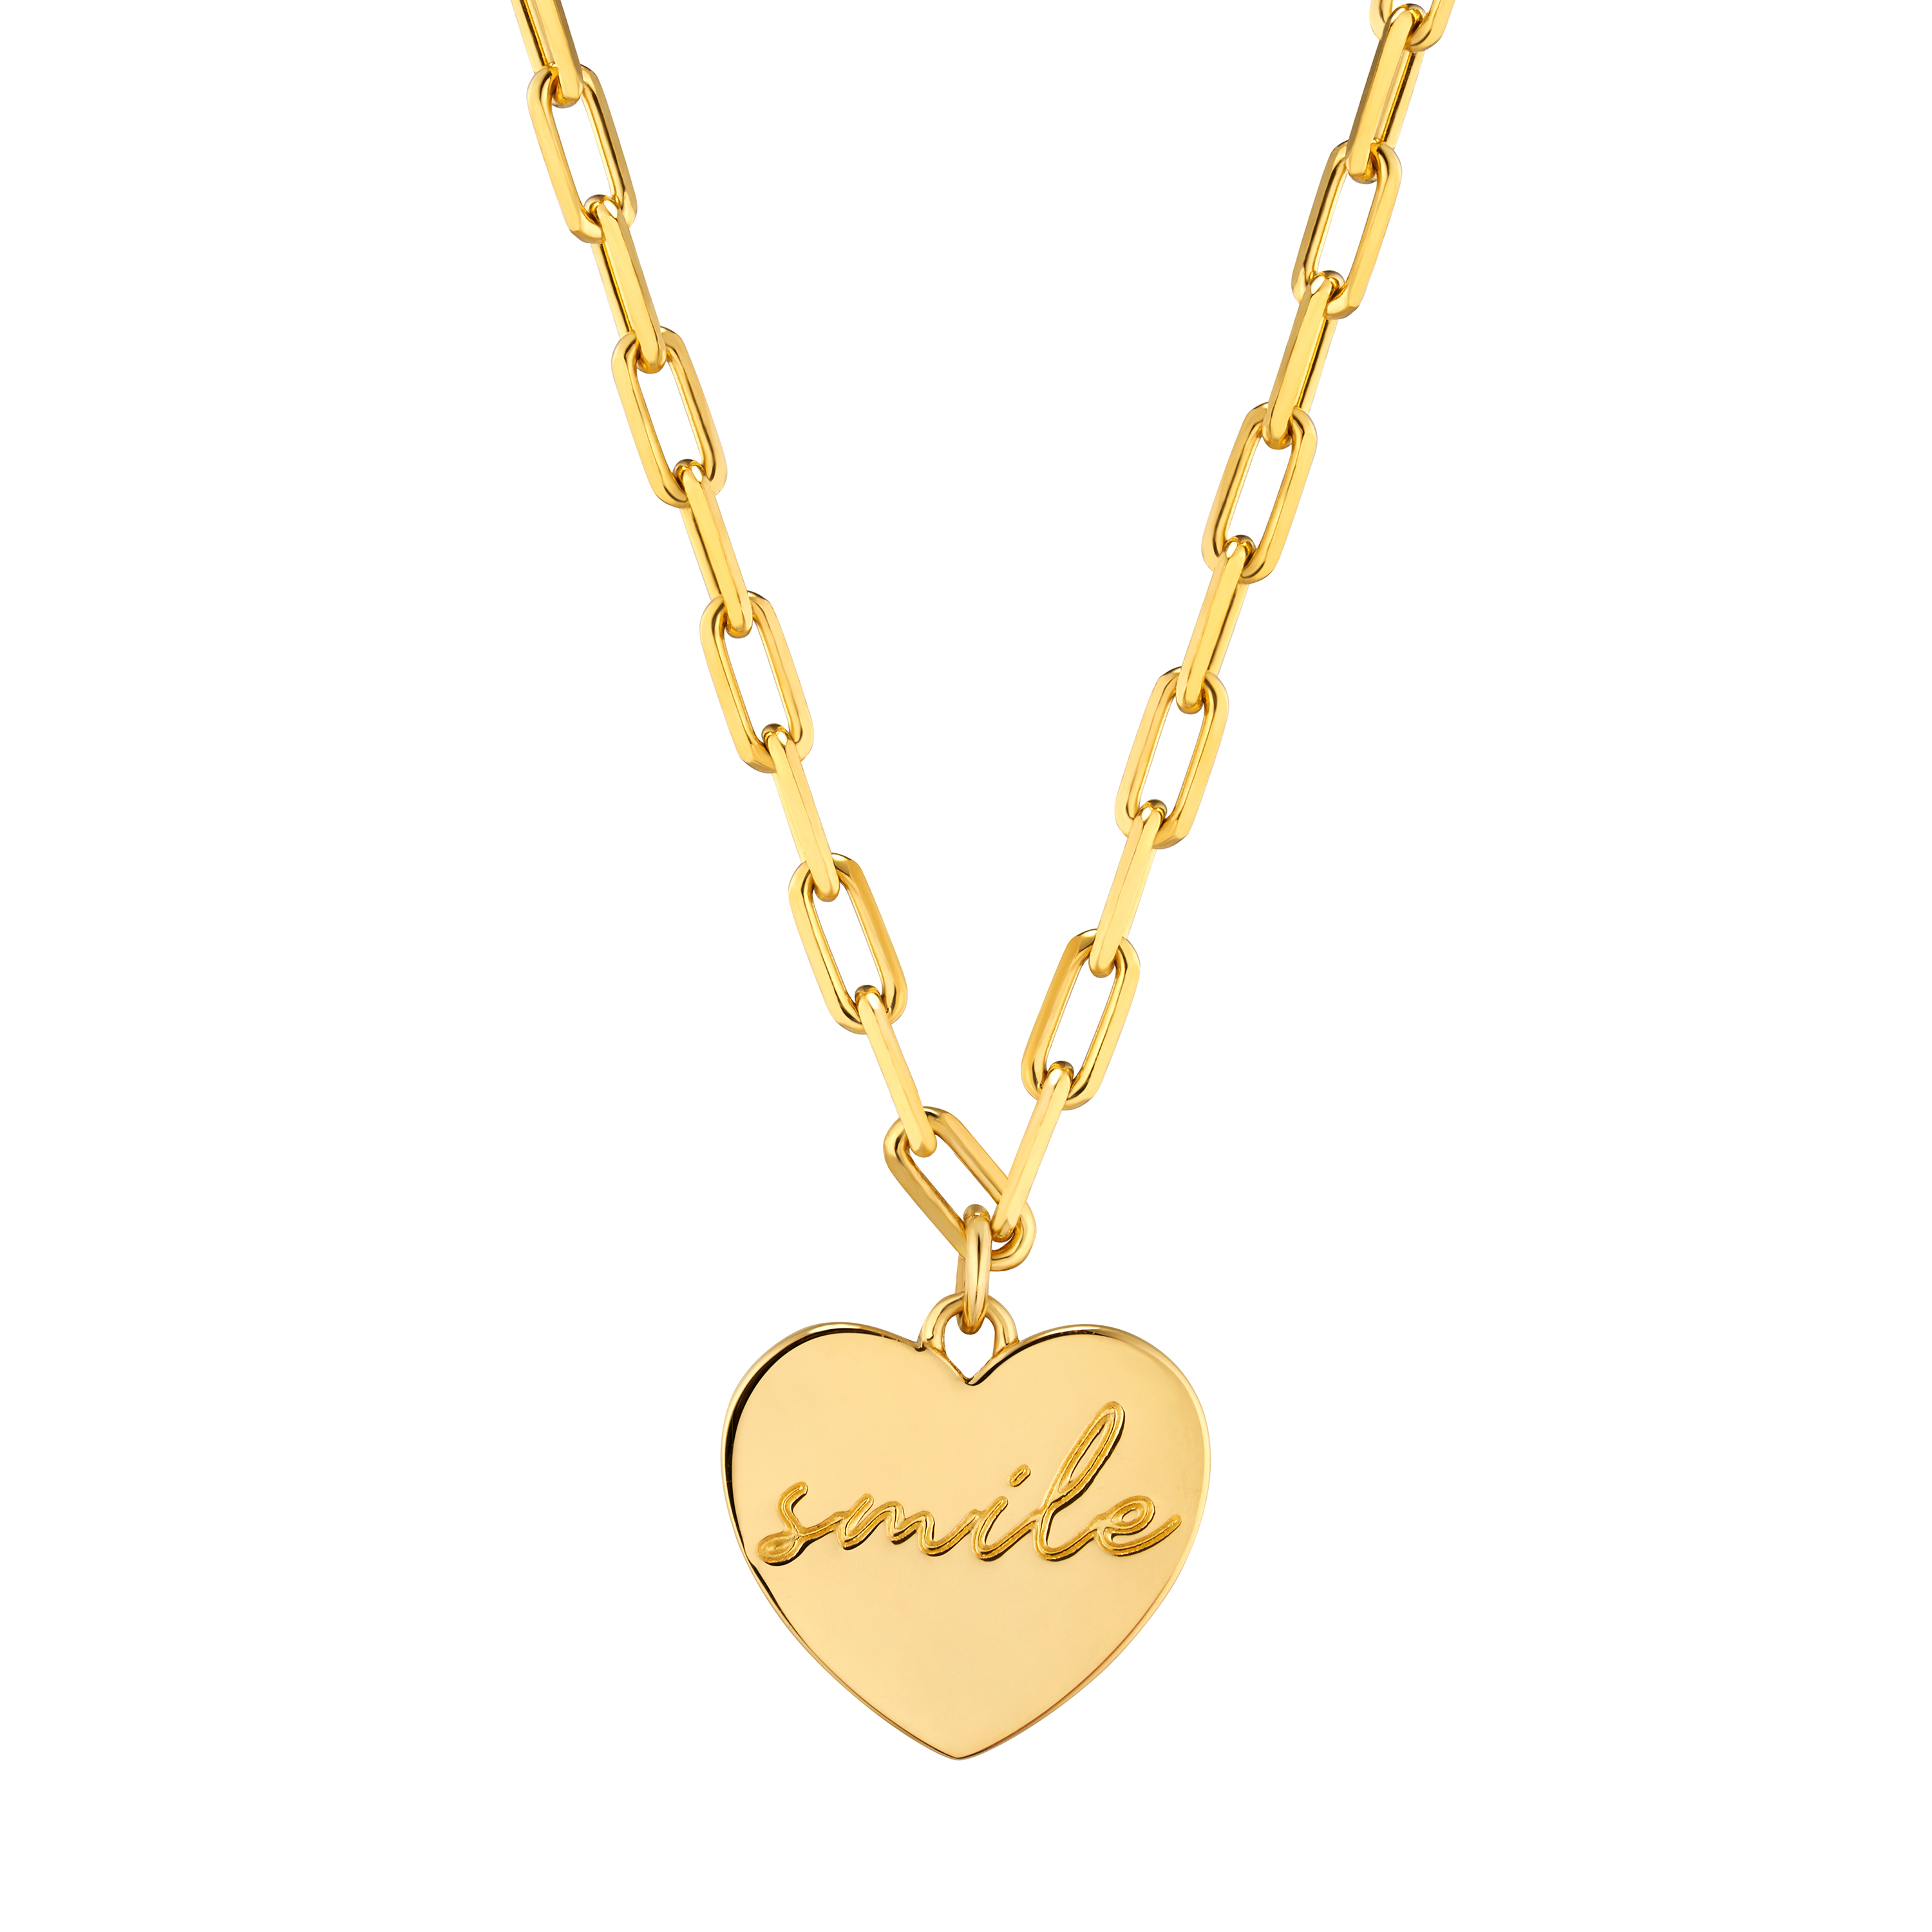 Gold of Light and Shadow Heart-shaped Necklace